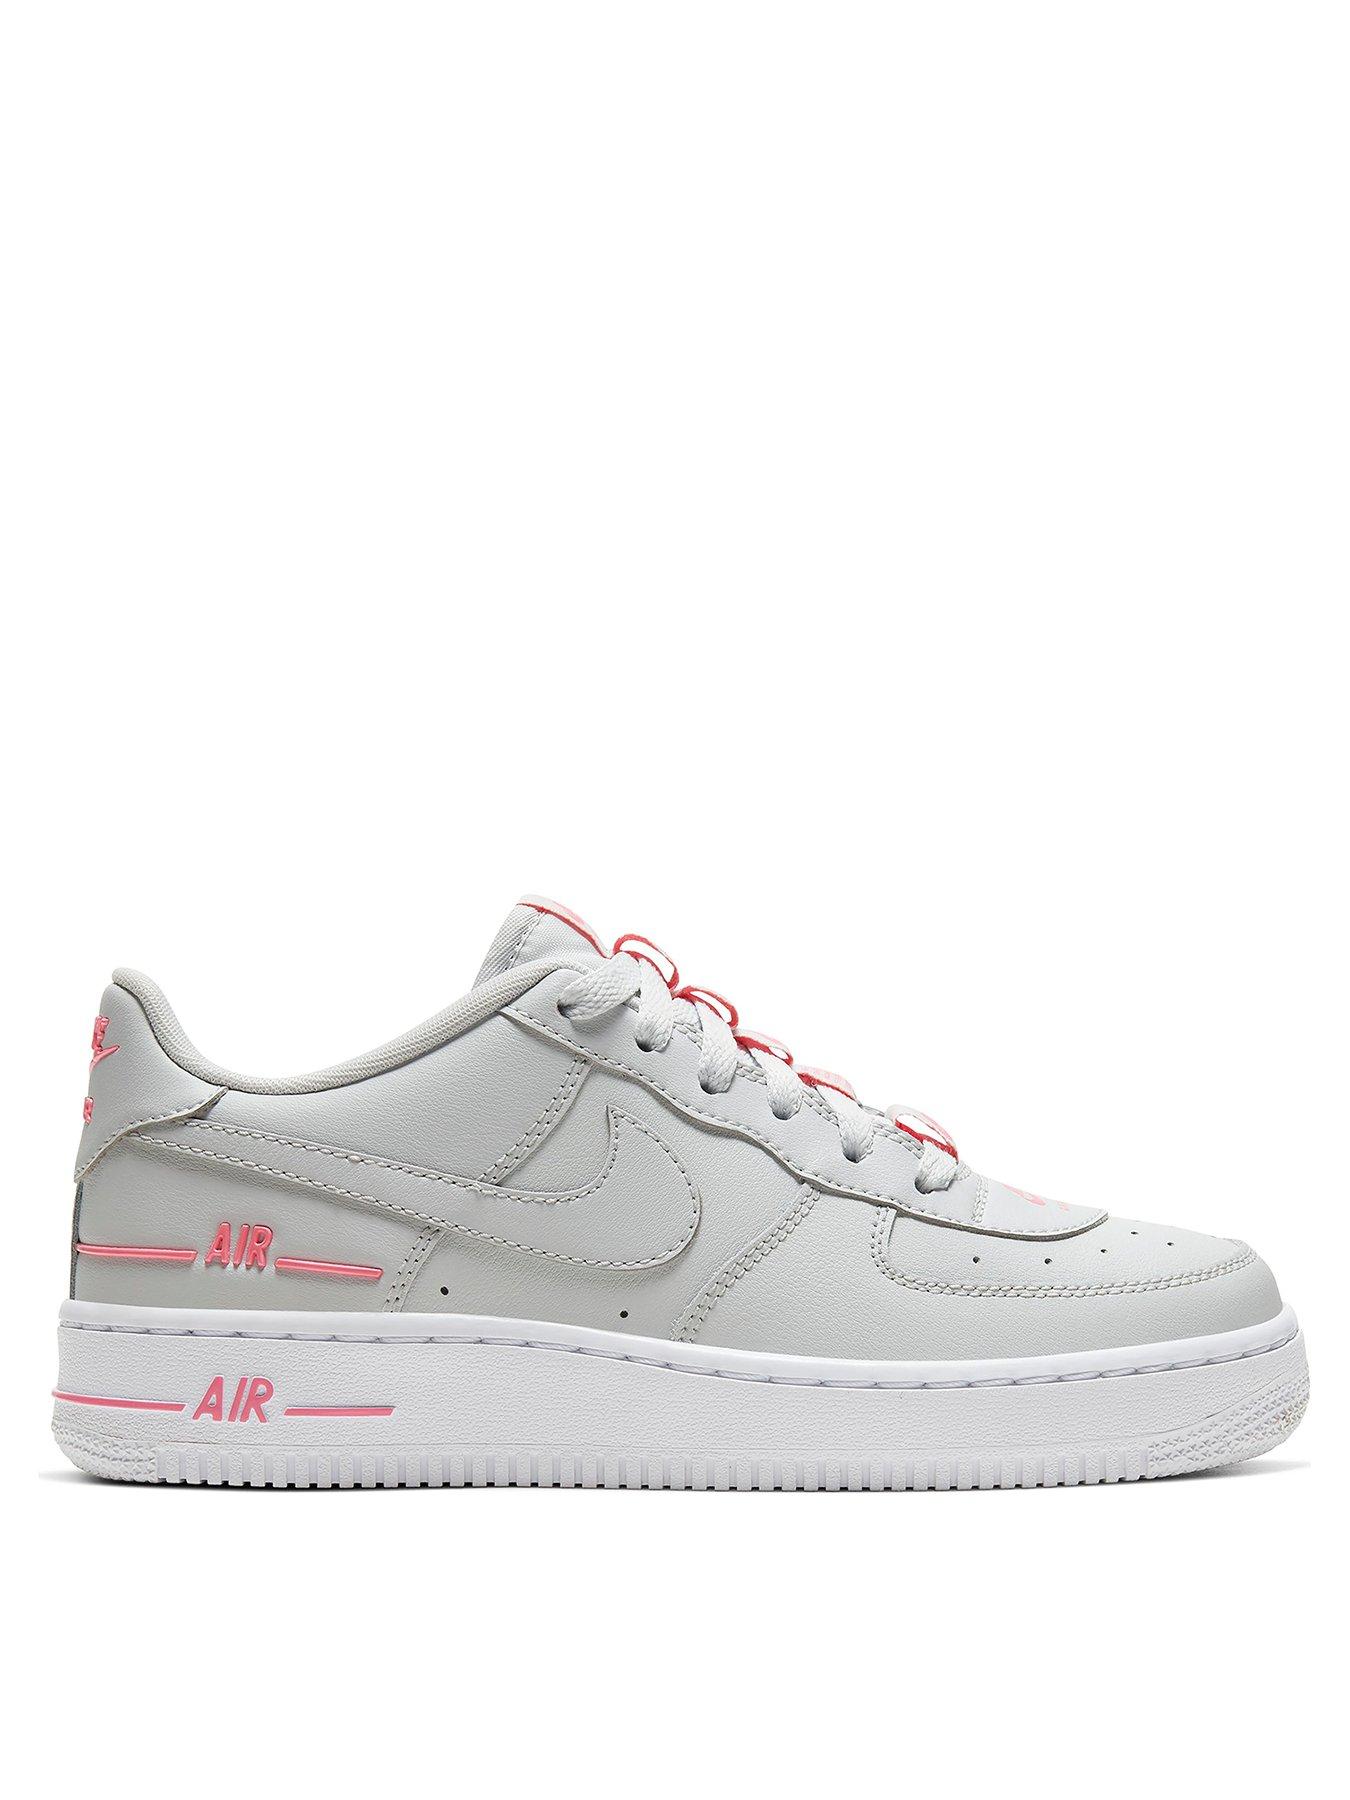 pink air force 1 size 3